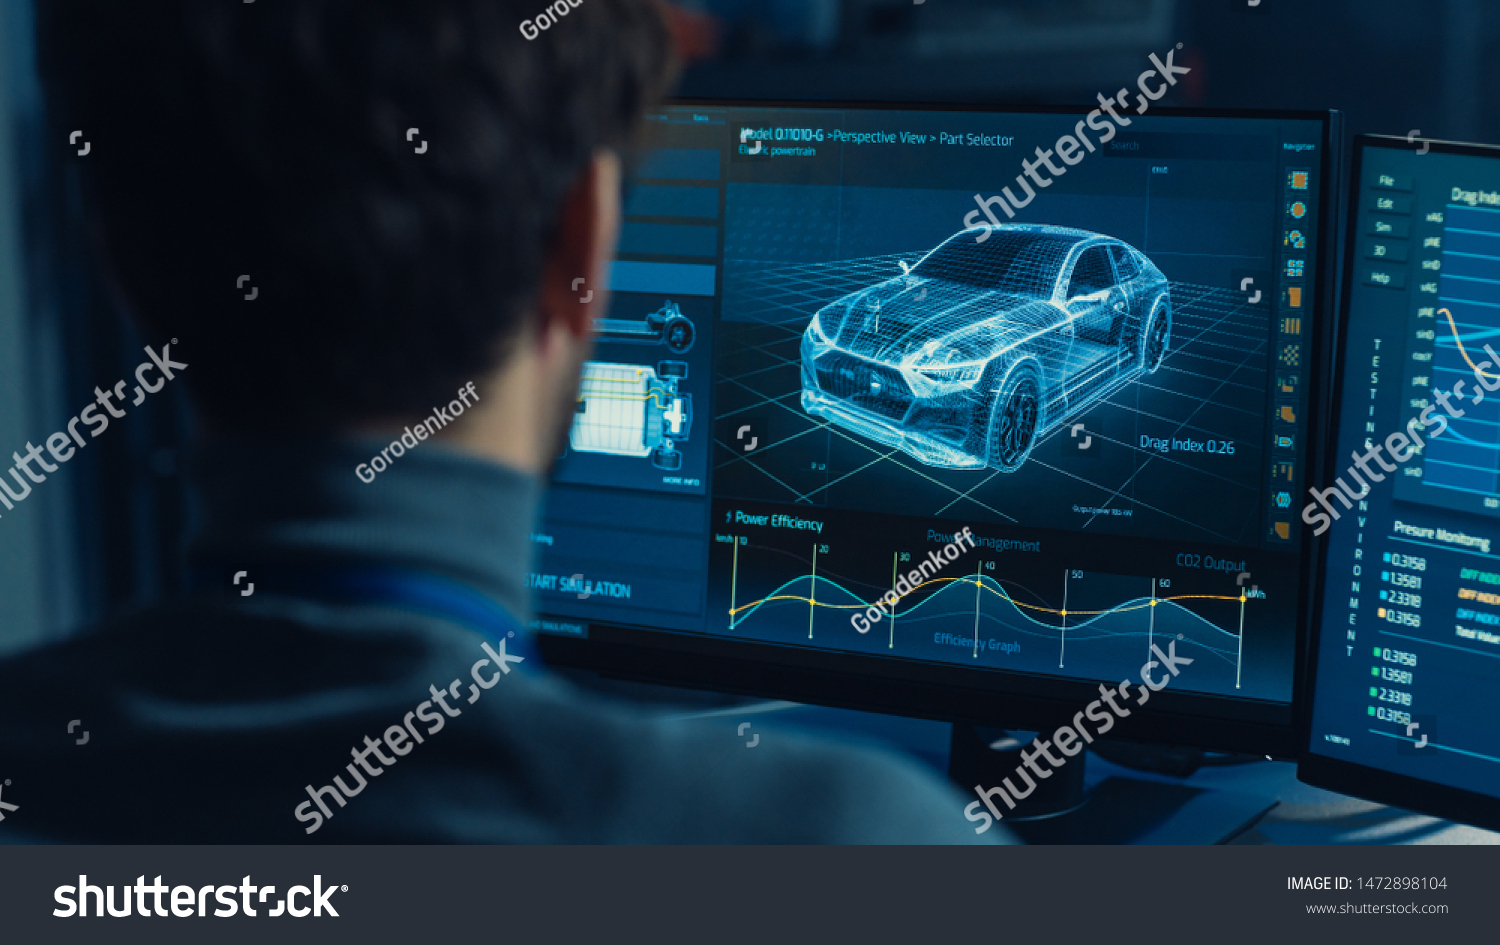 Professional Automotive Graphic Designer is Working on 3D CAD Software Rendering Electric Concept Car and Calculating its Efficiency in a High Tech Innovative Laboratory with a Prototype. #1472898104